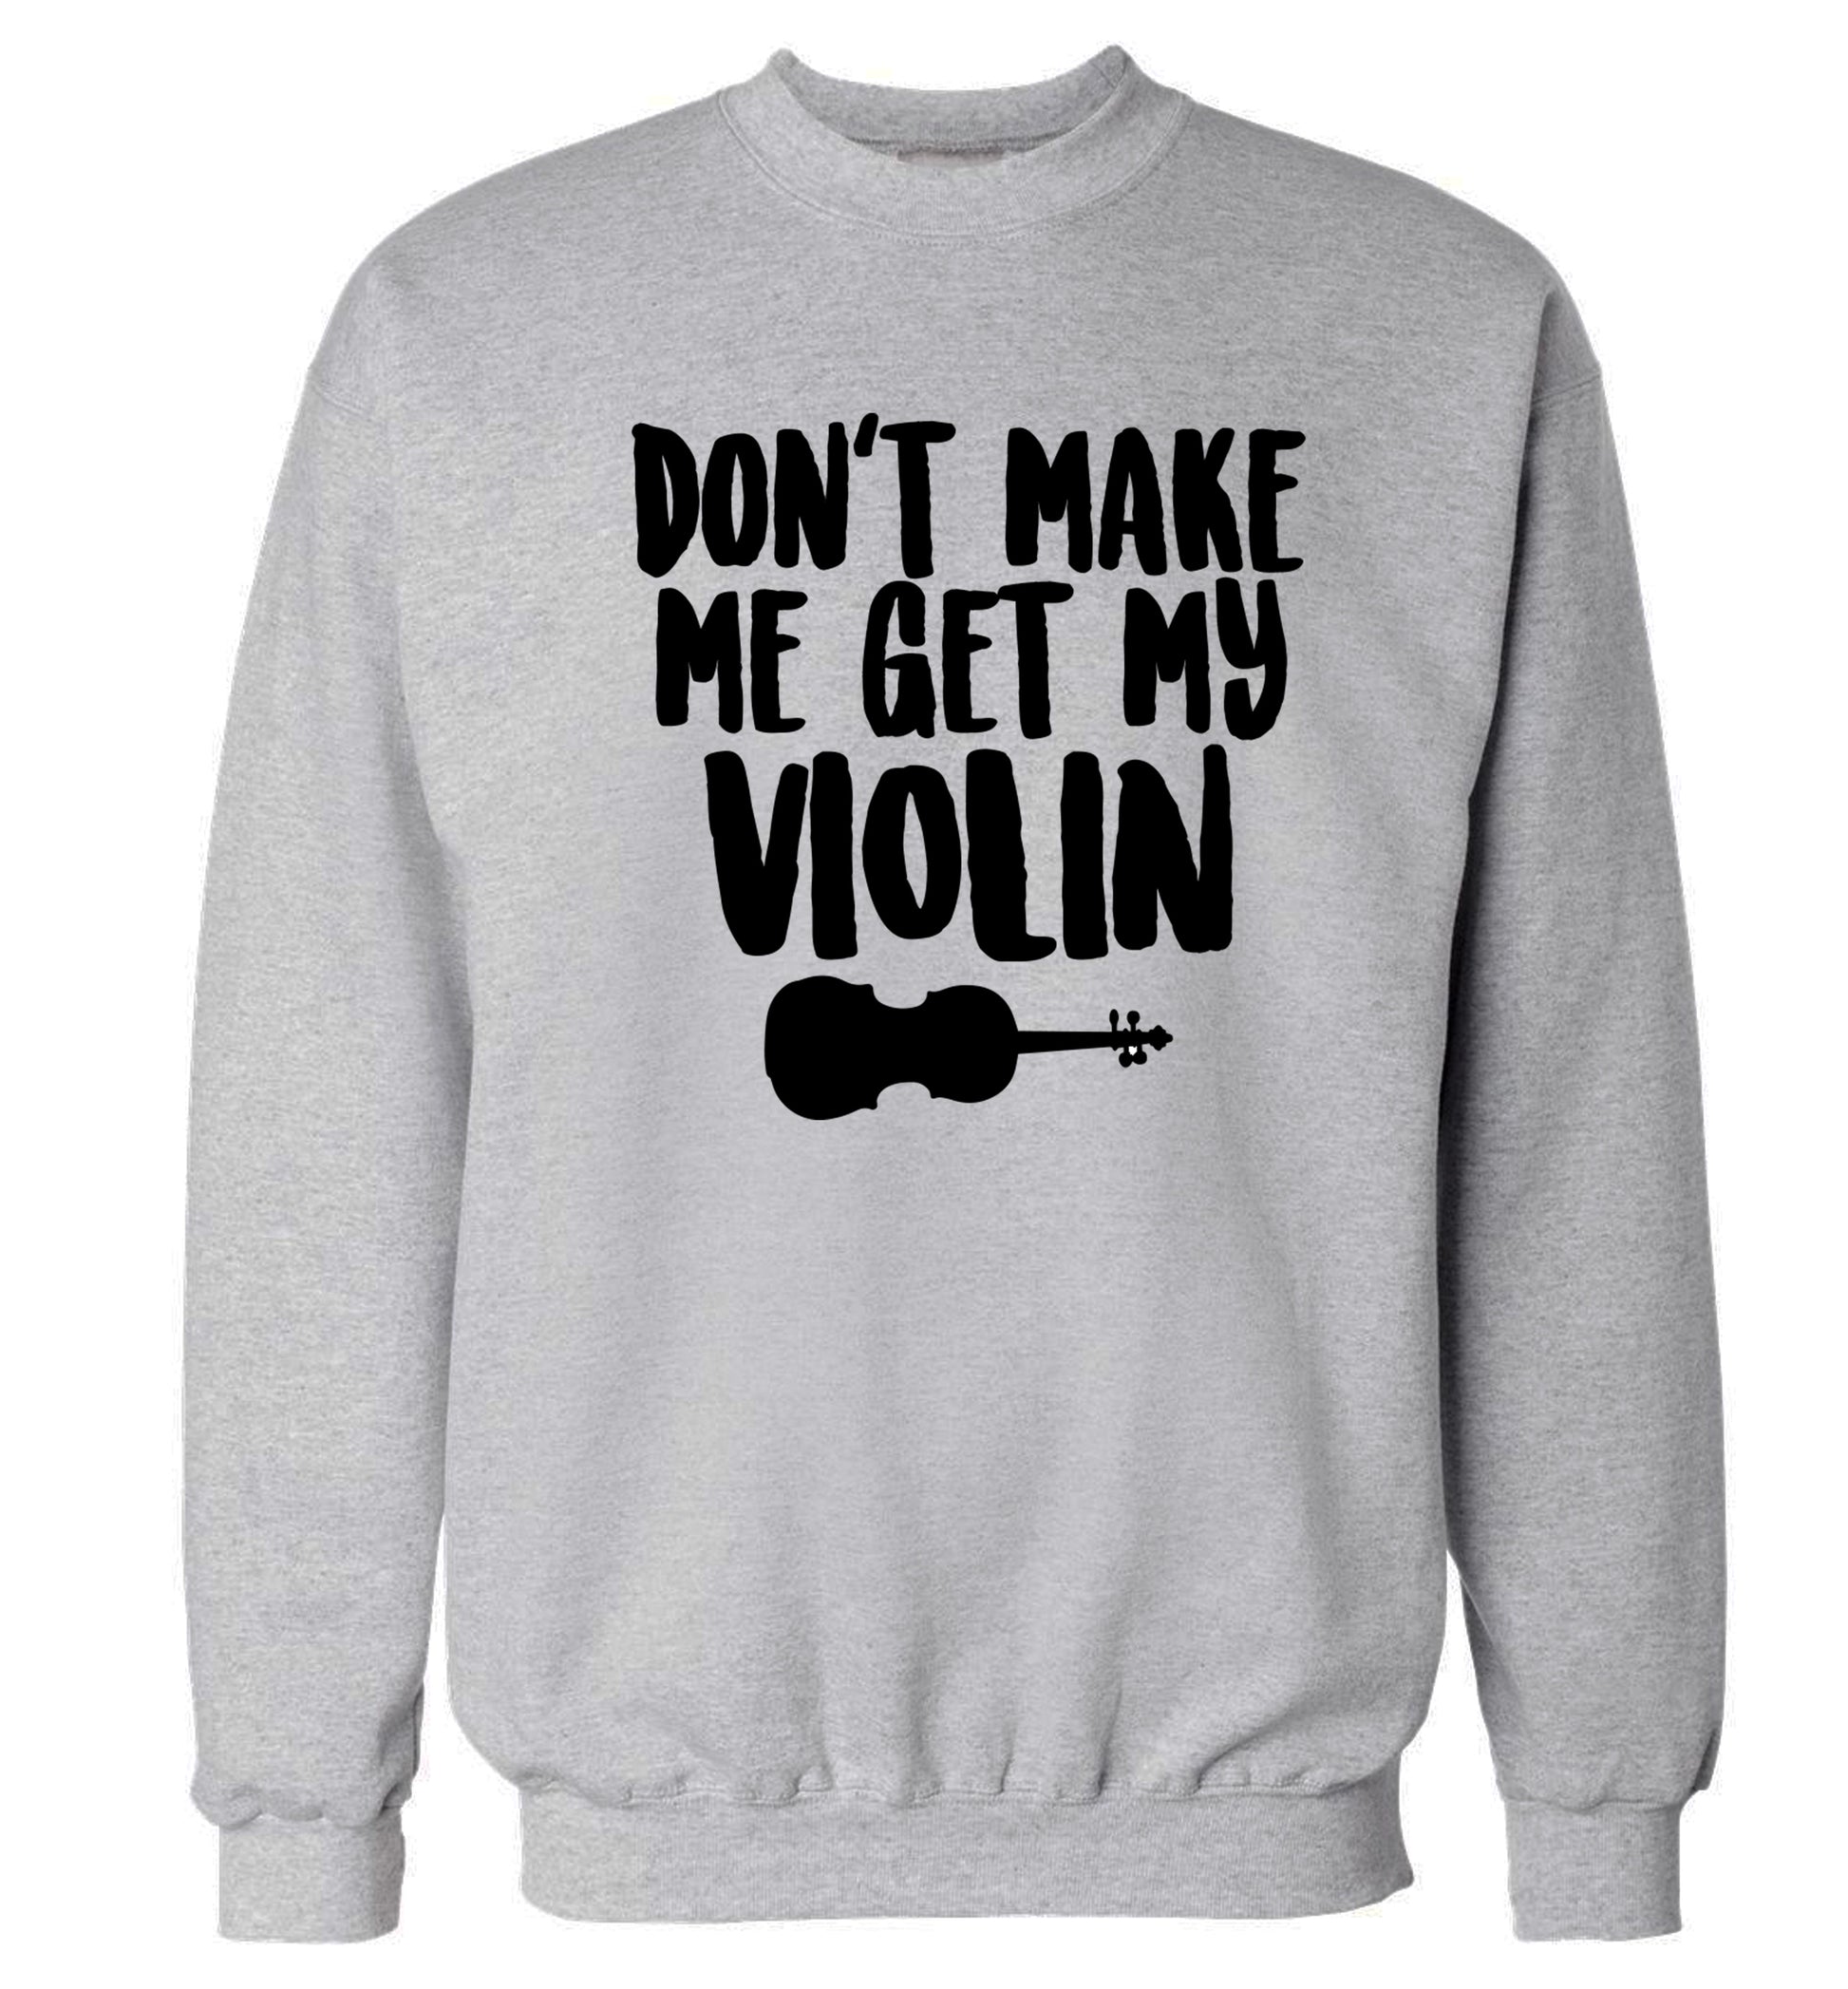 Don't make me get my violin Adult's unisex grey Sweater 2XL